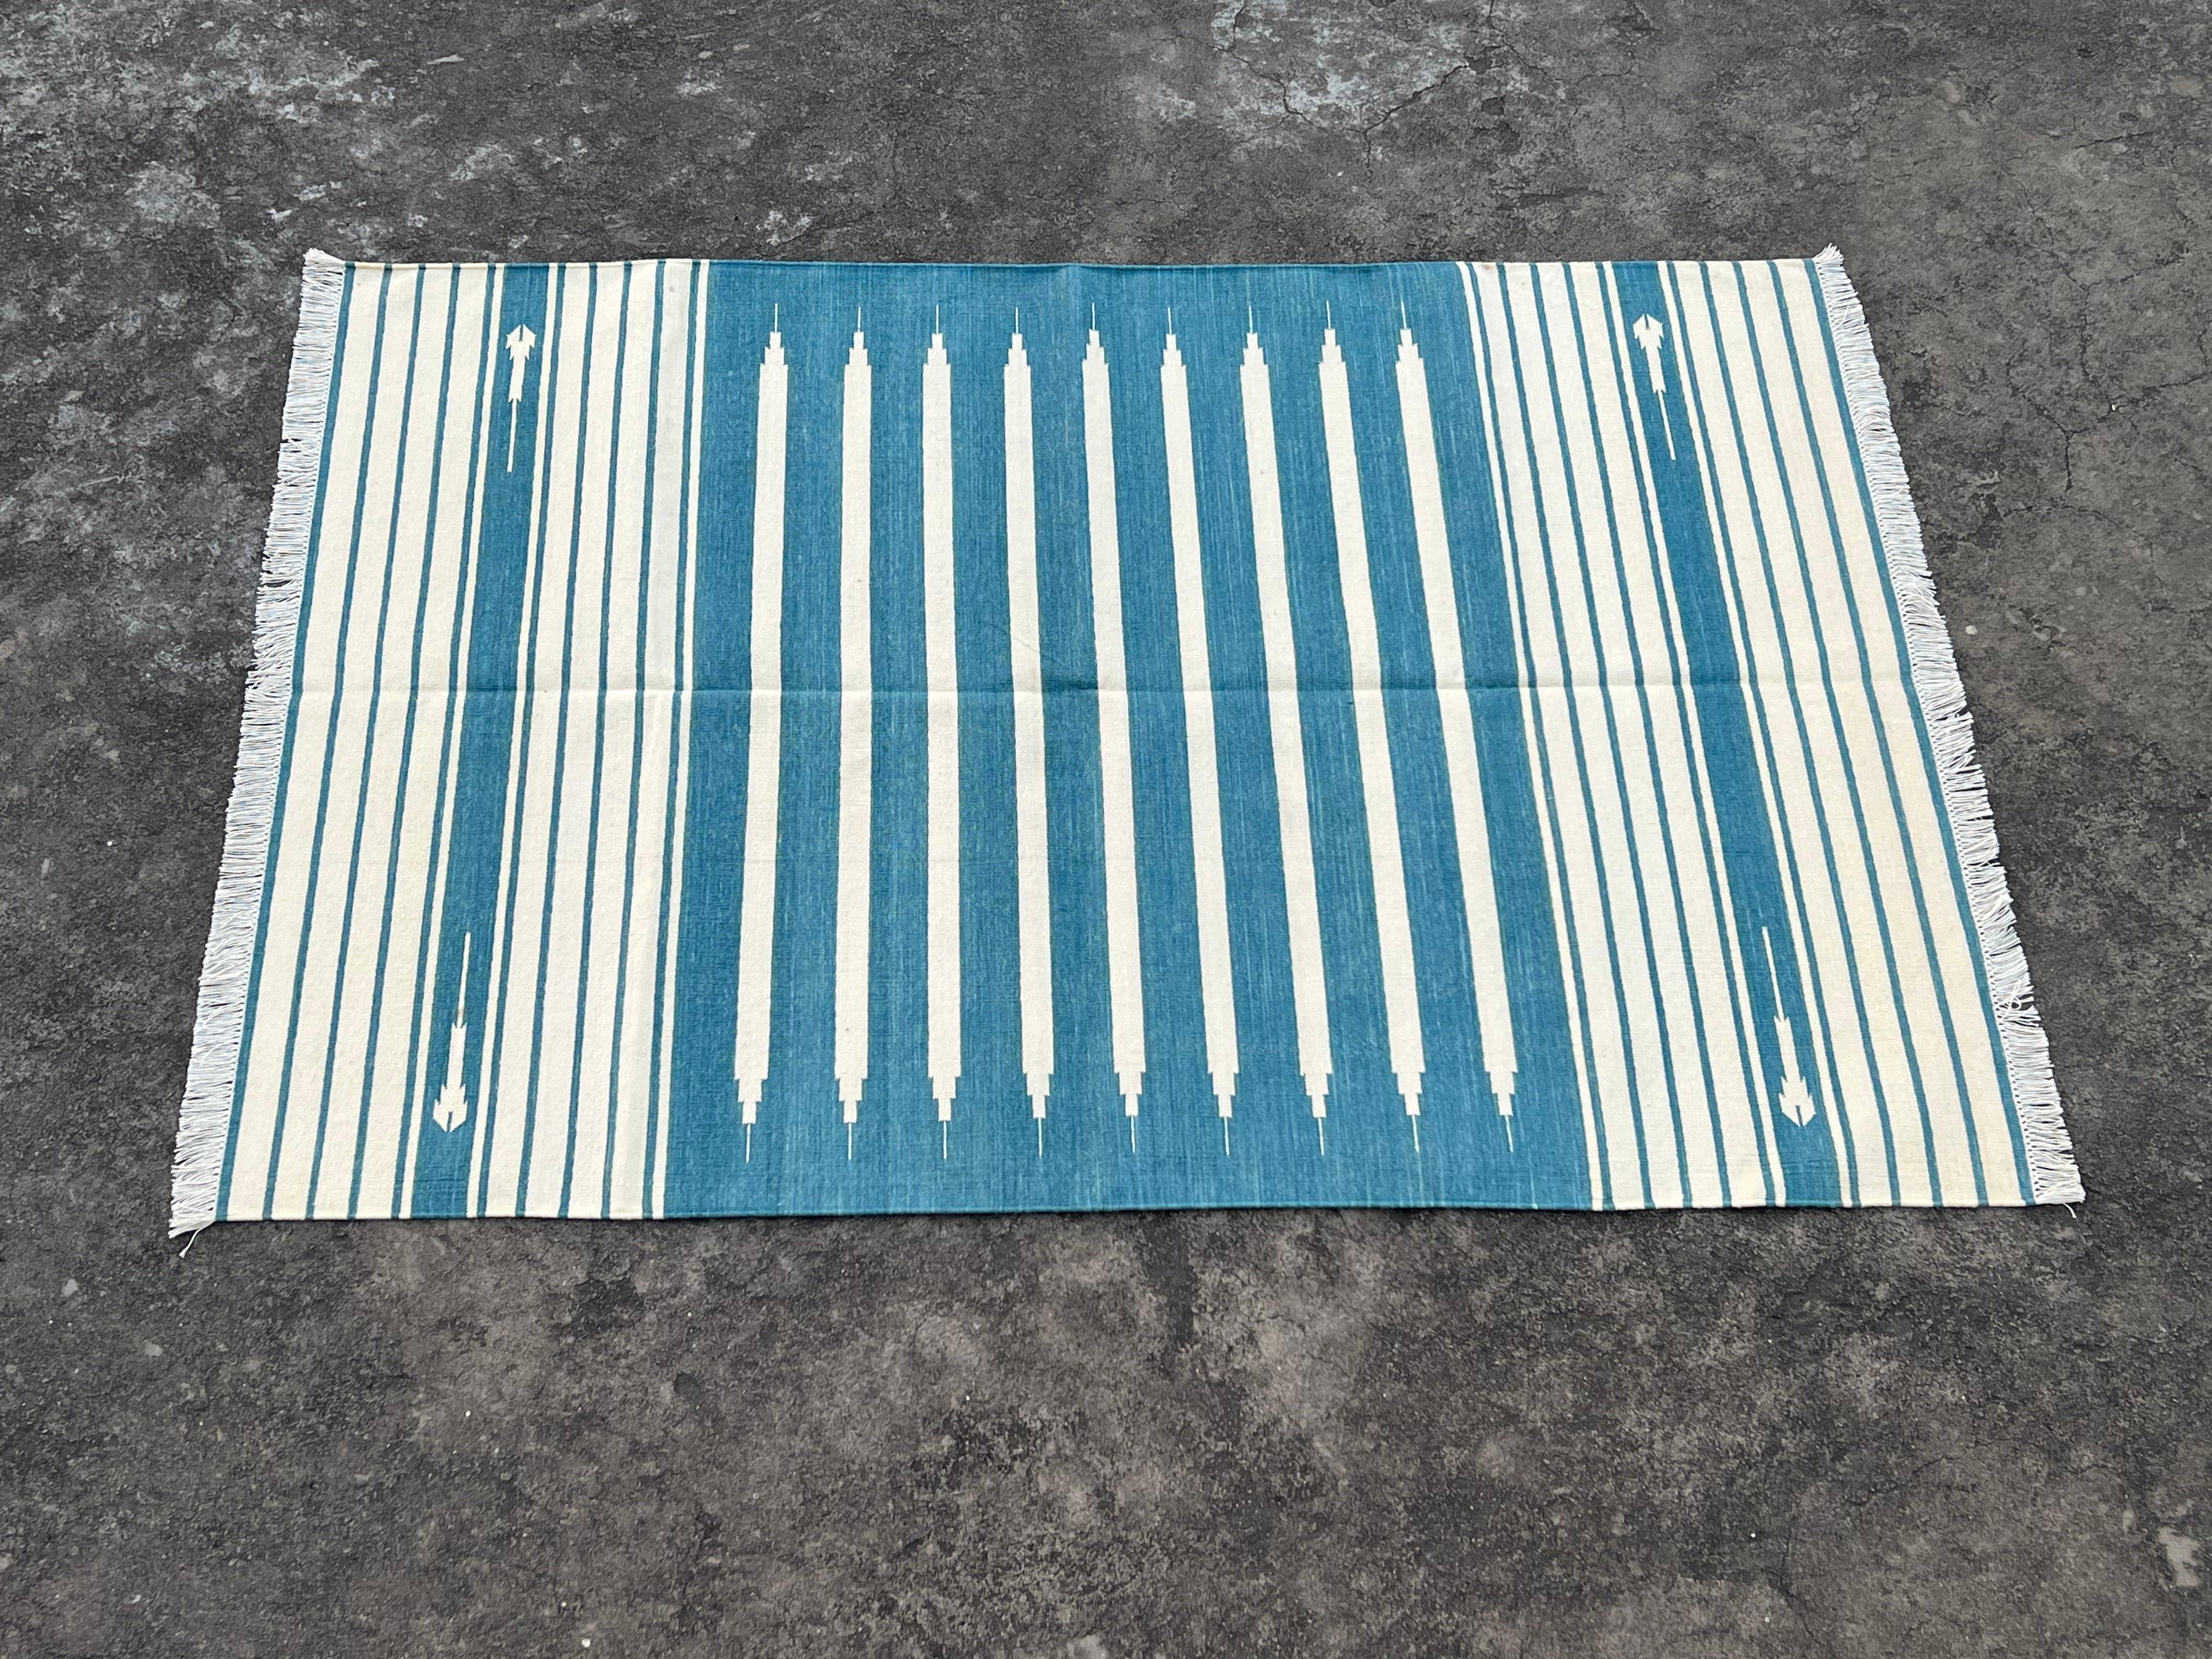 Handmade Cotton Area Flat Weave Rug, 4x6 Cream And Blue Striped Indian Dhurrie For Sale 5